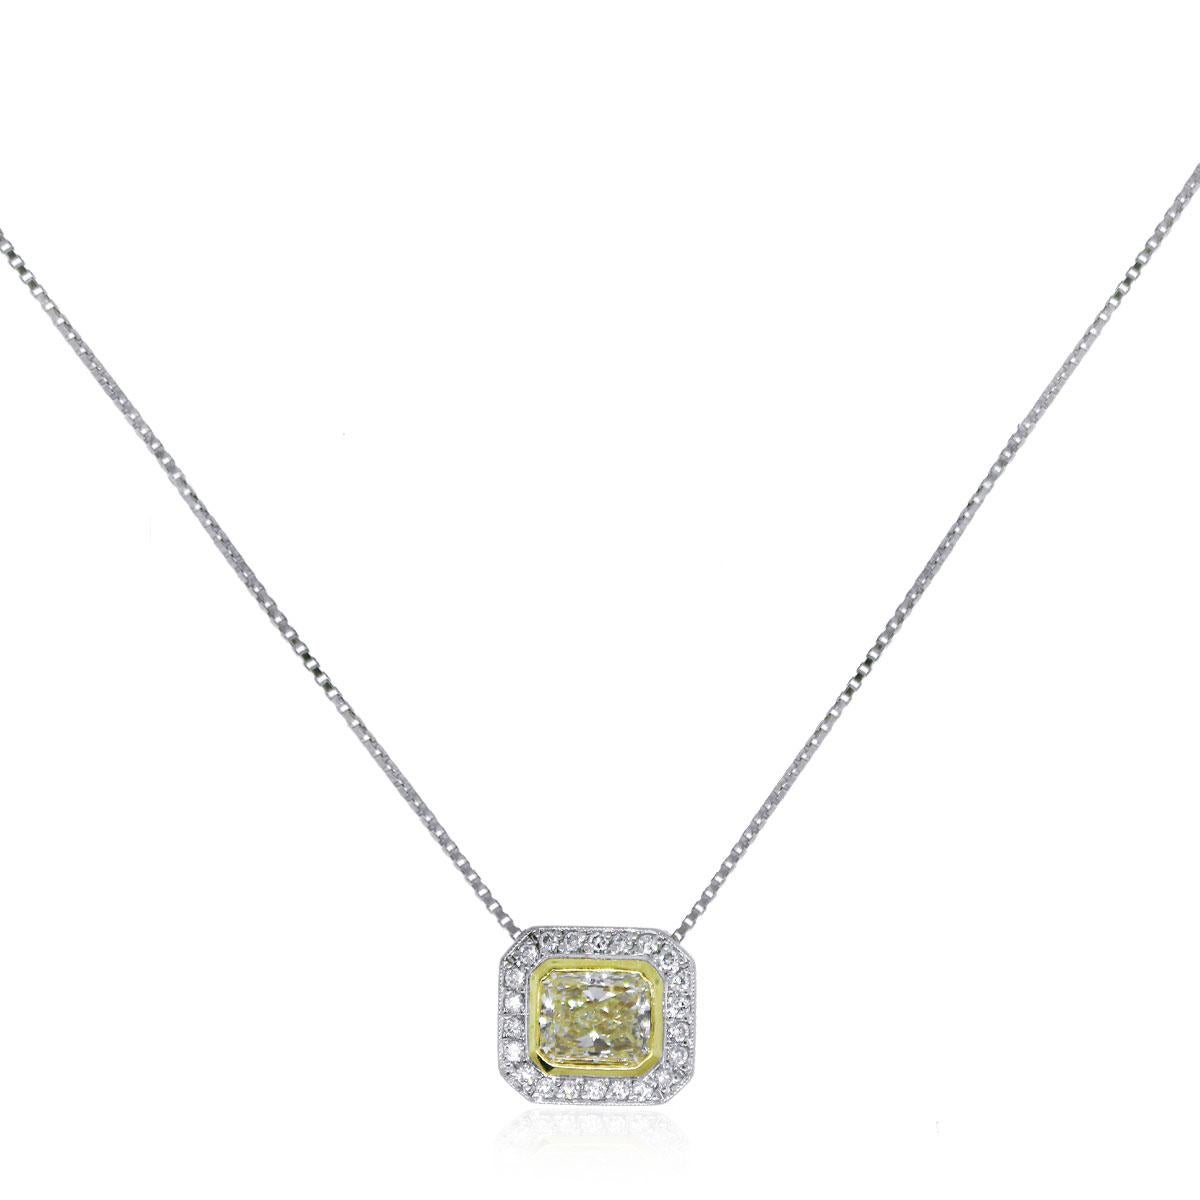 Material: 18k White Gold and 18k Yellow Gold
Diamond Details: Approximately 1.25ctw yellow diamonds and approximately 0.33ctw white diamonds. 1.58ctw Total. Diamonds are G in color and VS in clarity.clarity.
Clasps: Lobster clasp
Total Weight: 6g